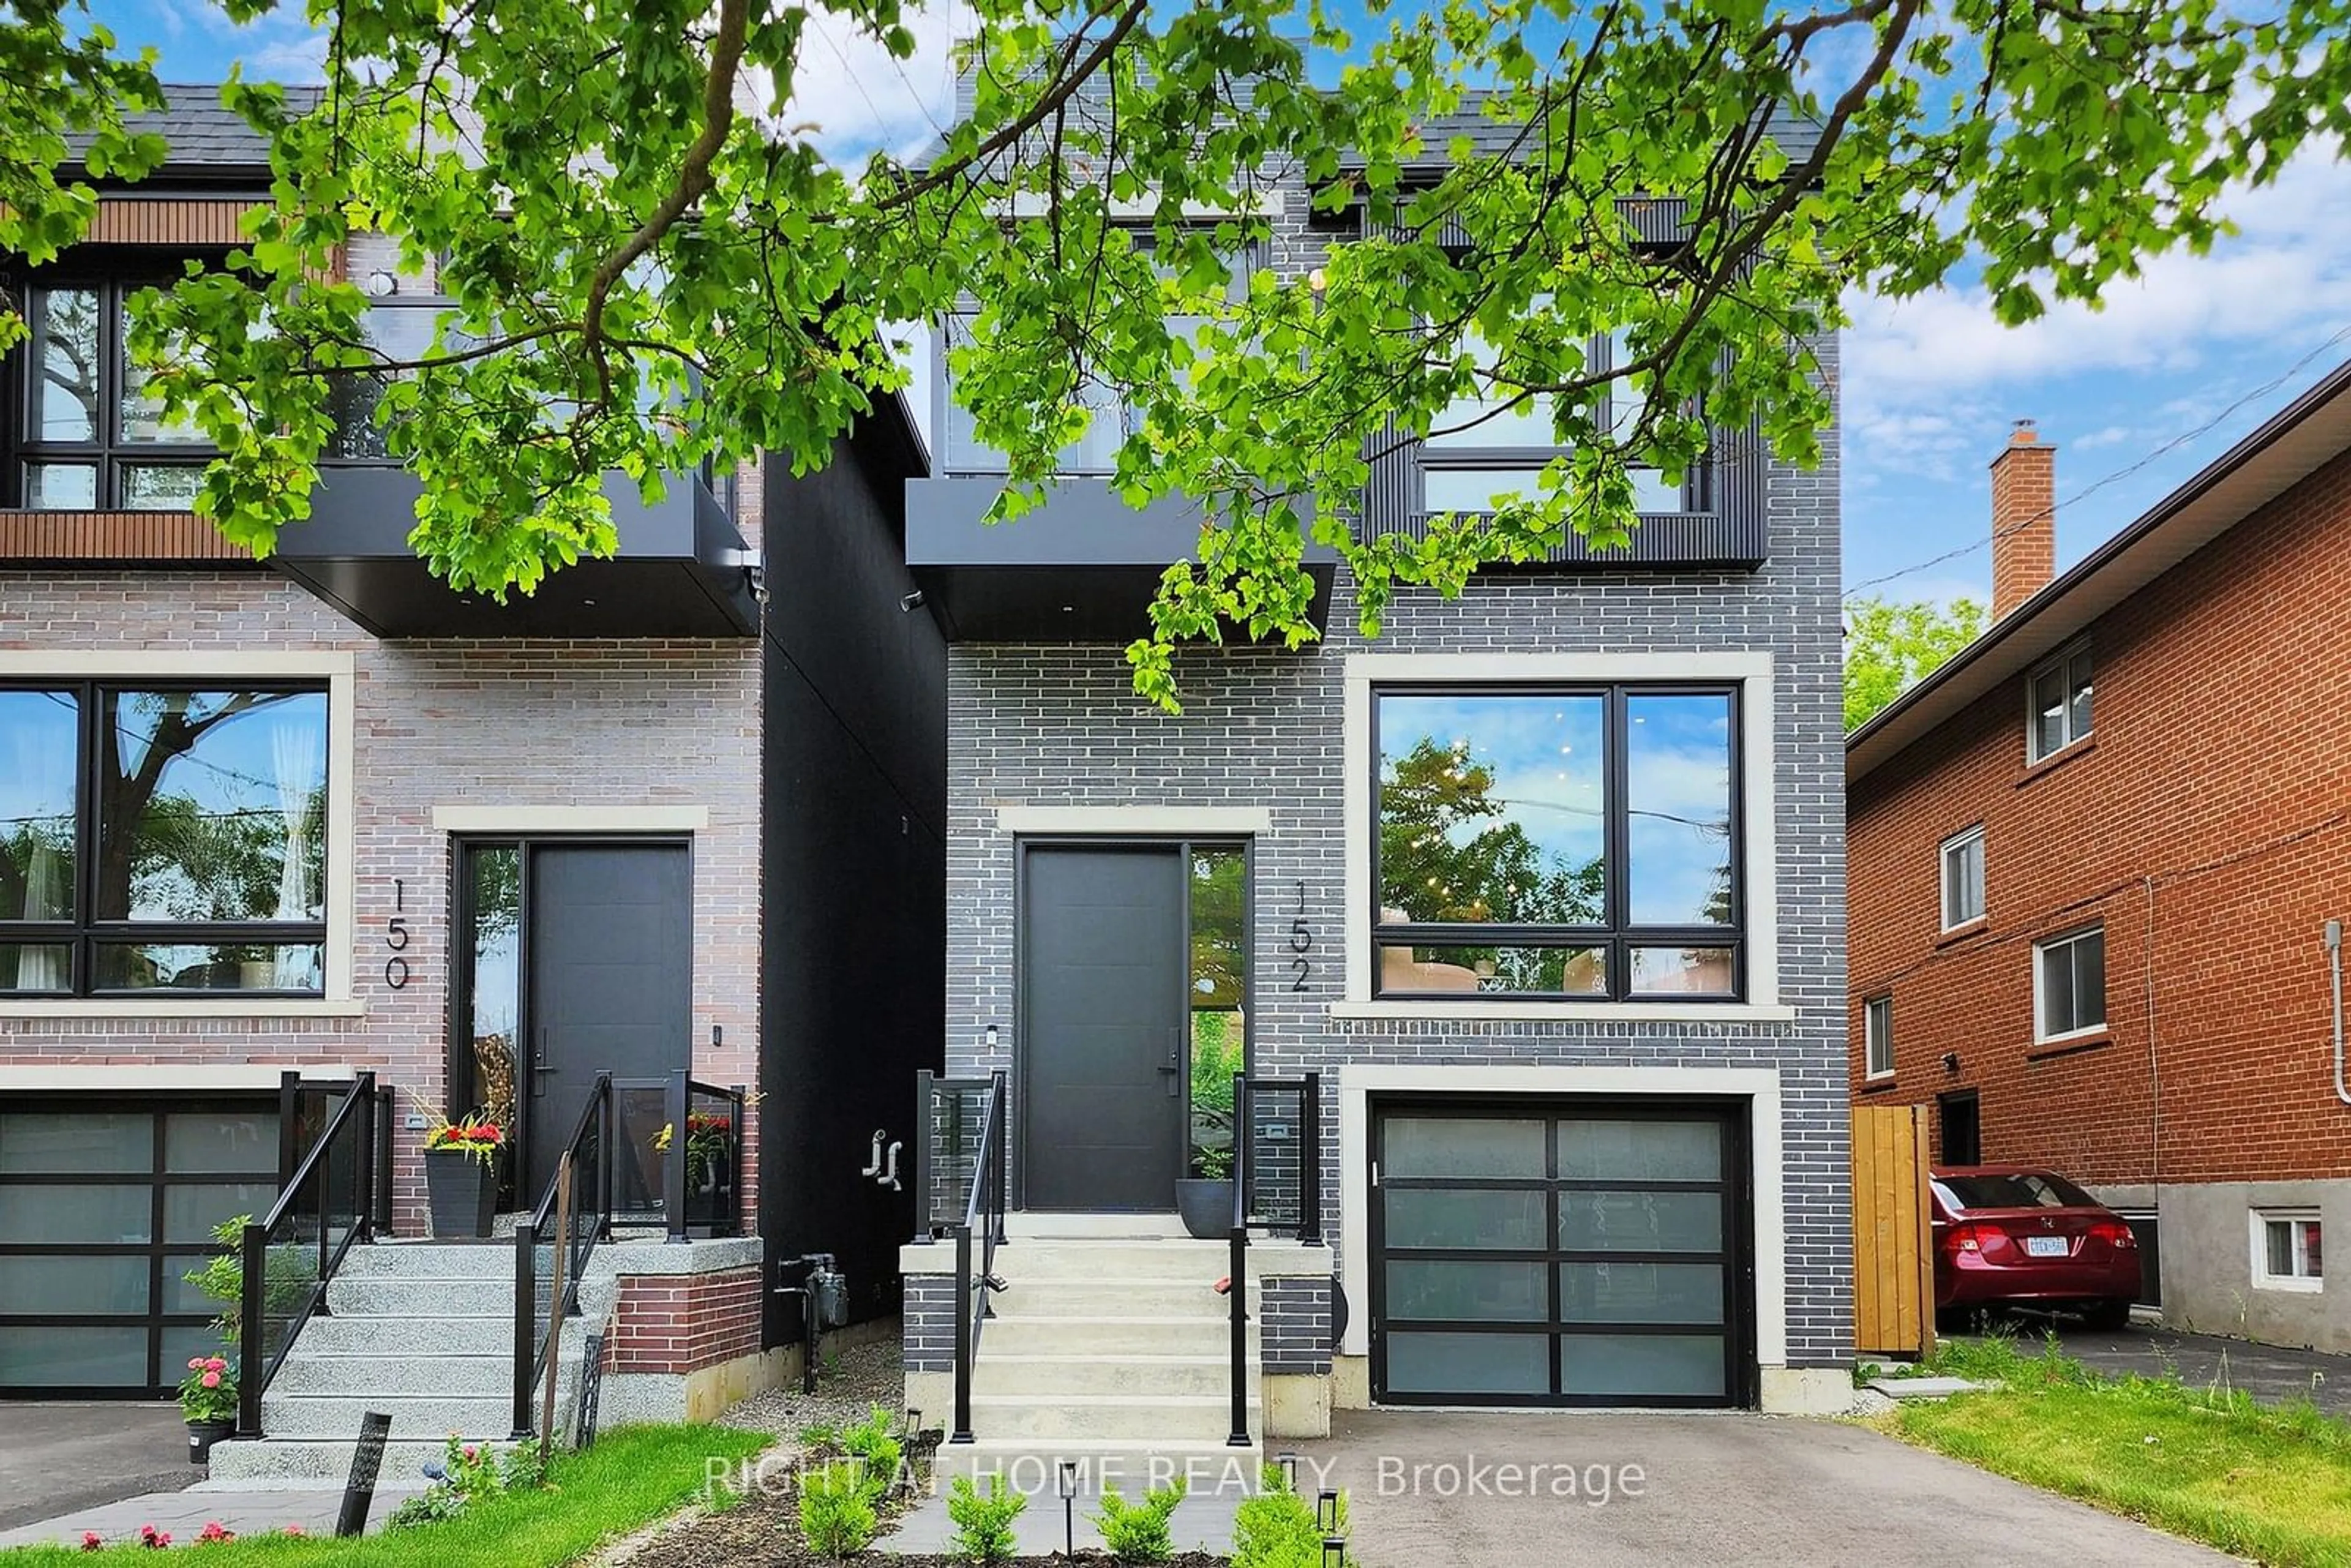 Home with brick exterior material for 152 Sheldon Ave, Toronto Ontario M8W 4L5